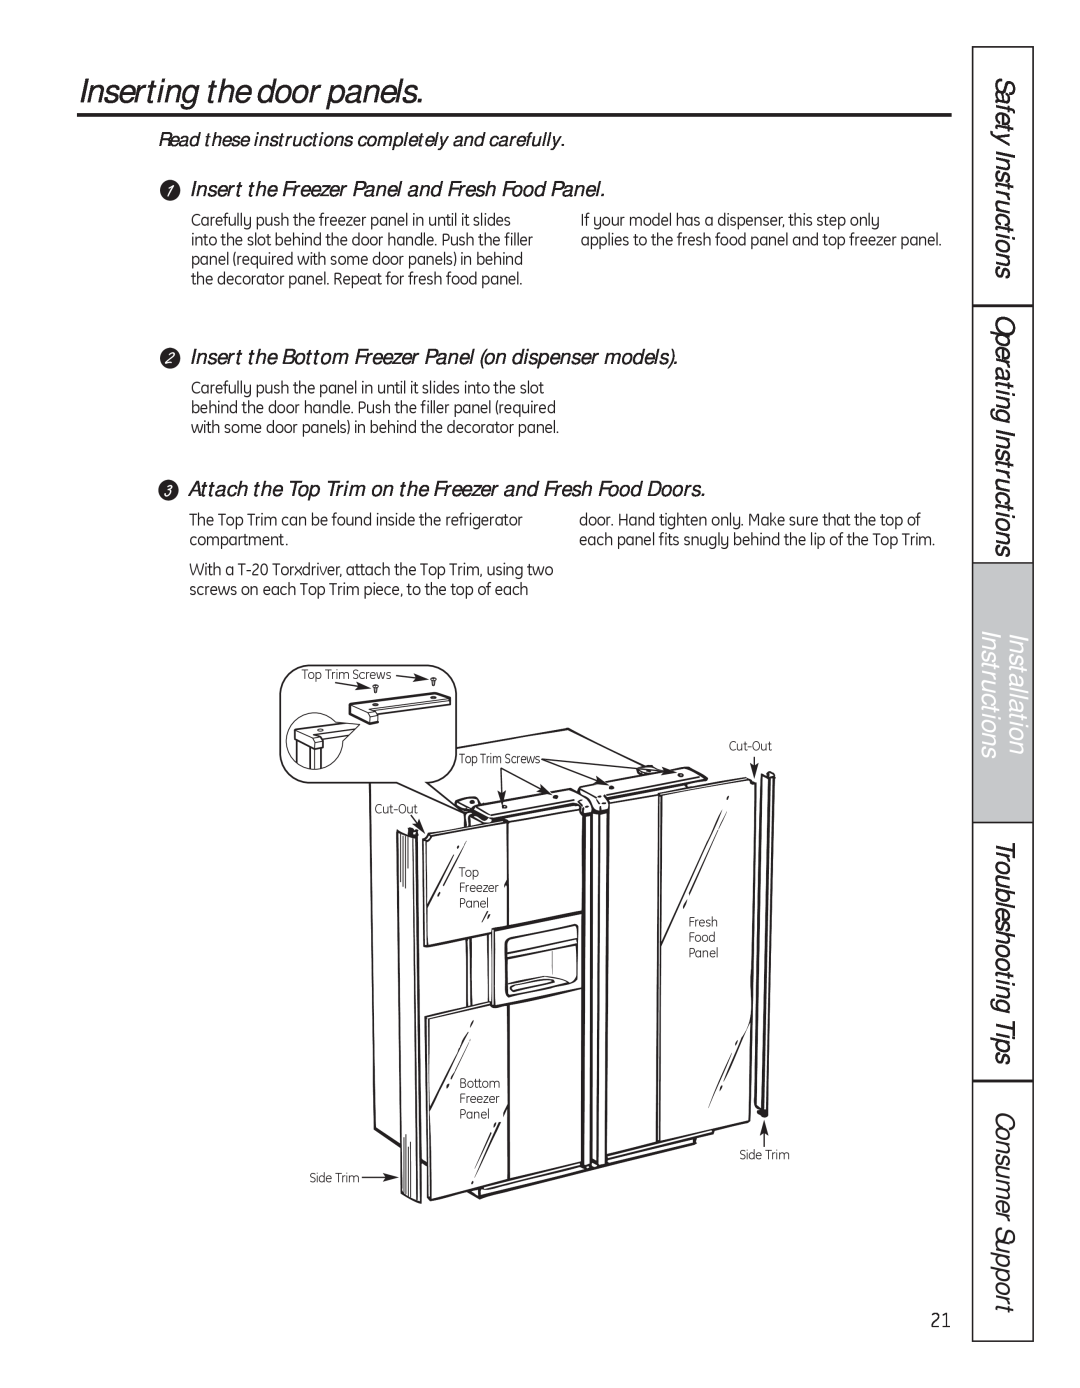 GE 200D8074P050 Inserting the door panels, Troubleshooting Tips Consumer Support, Installation Instructions 